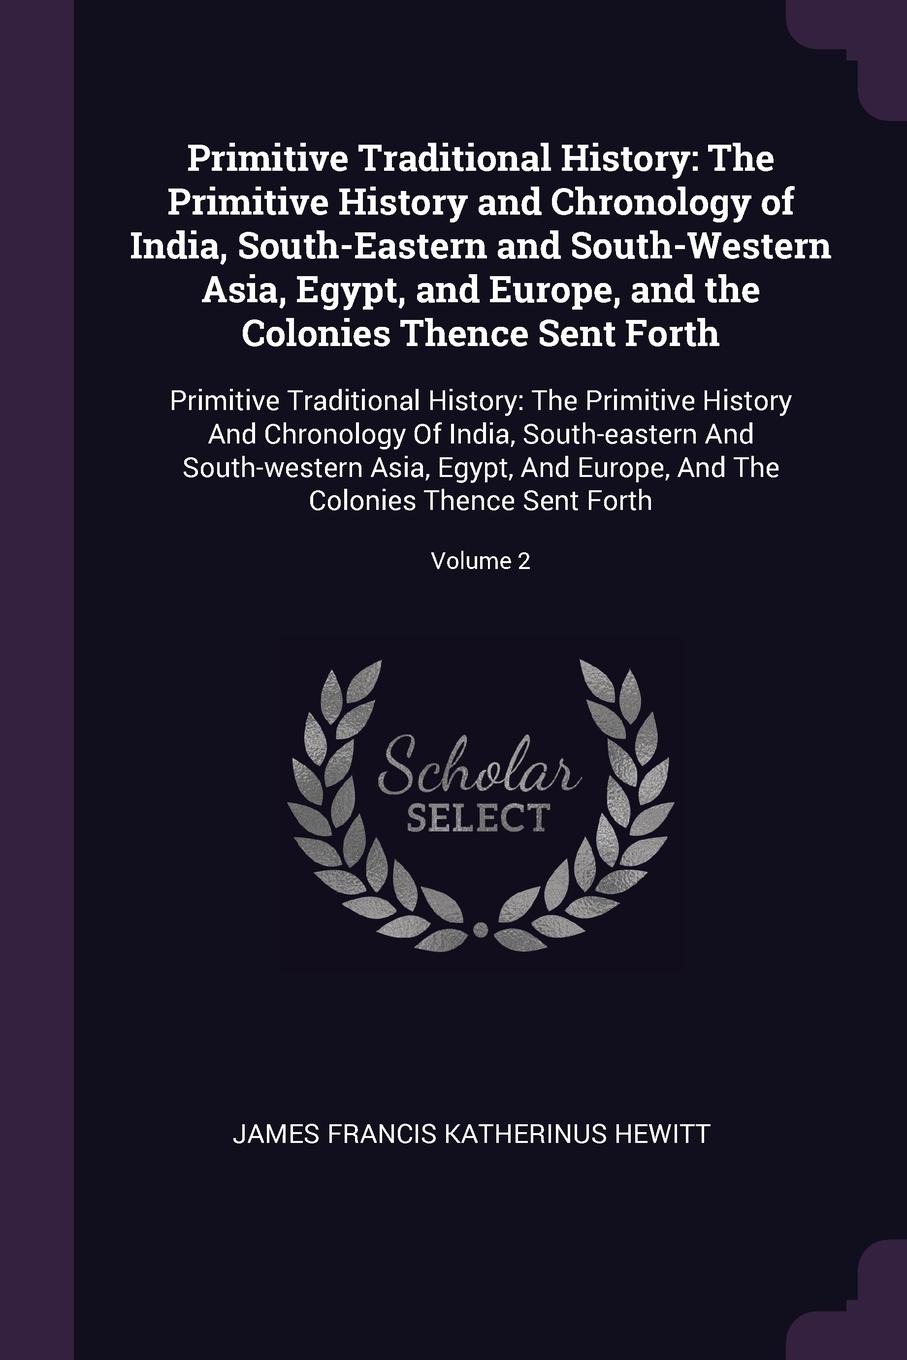 Primitive Traditional History. The Primitive History and Chronology of India, South-Eastern and South-Western Asia, Egypt, and Europe, and the Colonies Thence Sent Forth: Primitive Traditional History: The Primitive History And Chronology Of India...